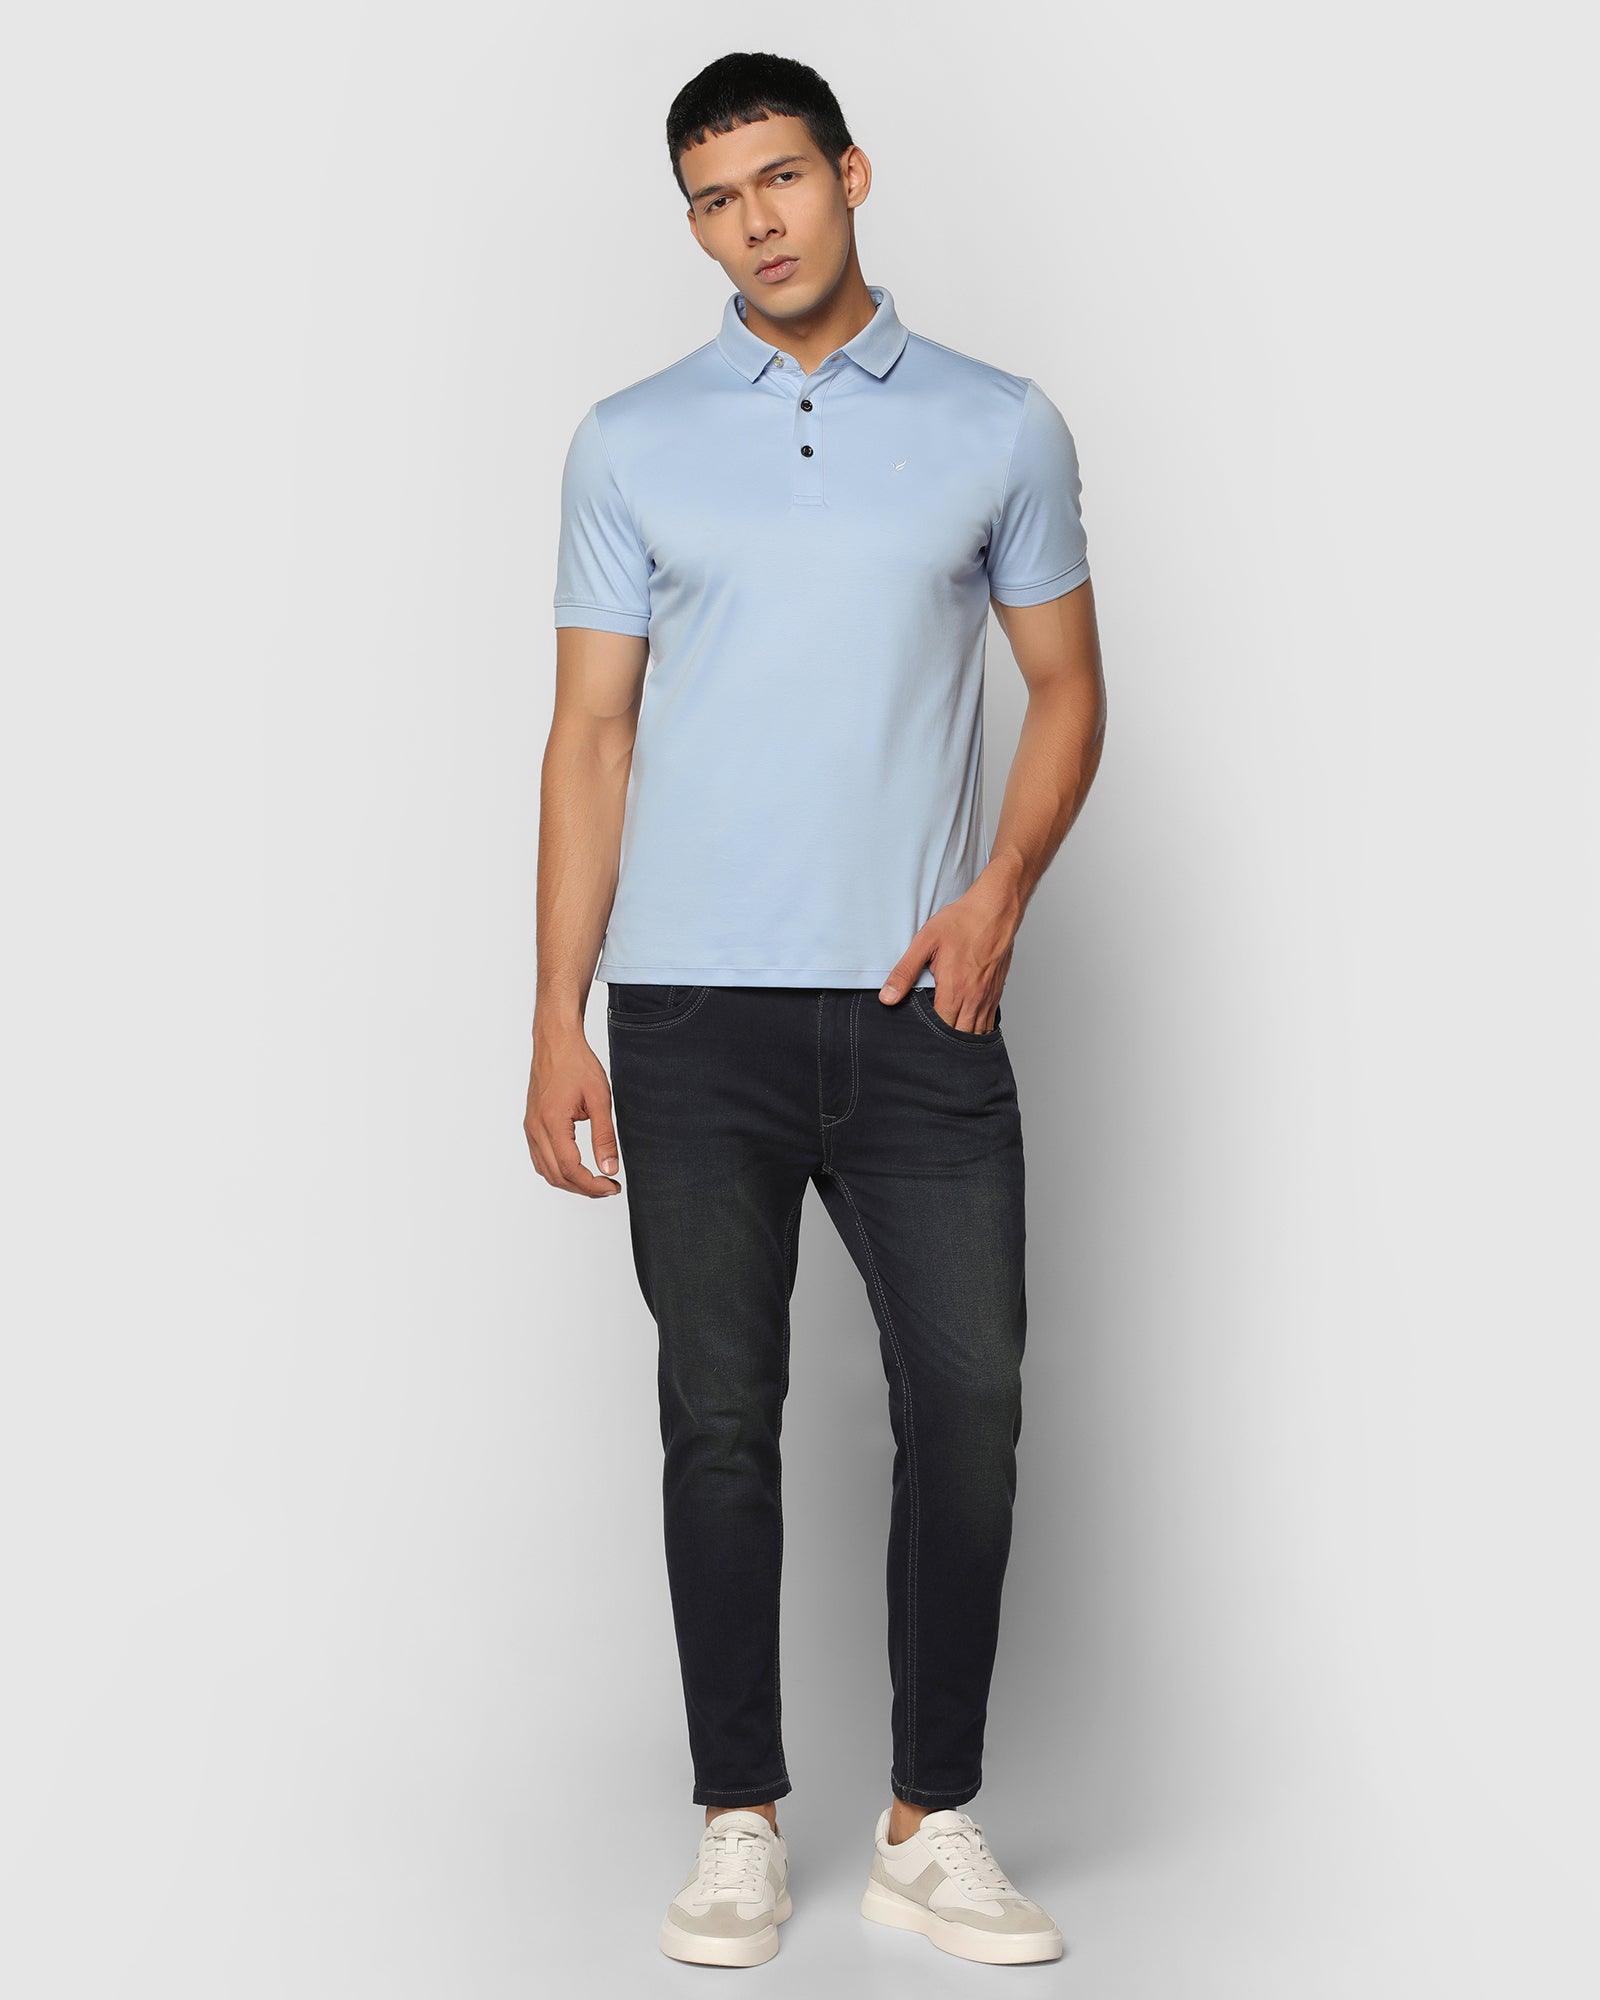 Polo T Shirt In Light Blue (Toll)